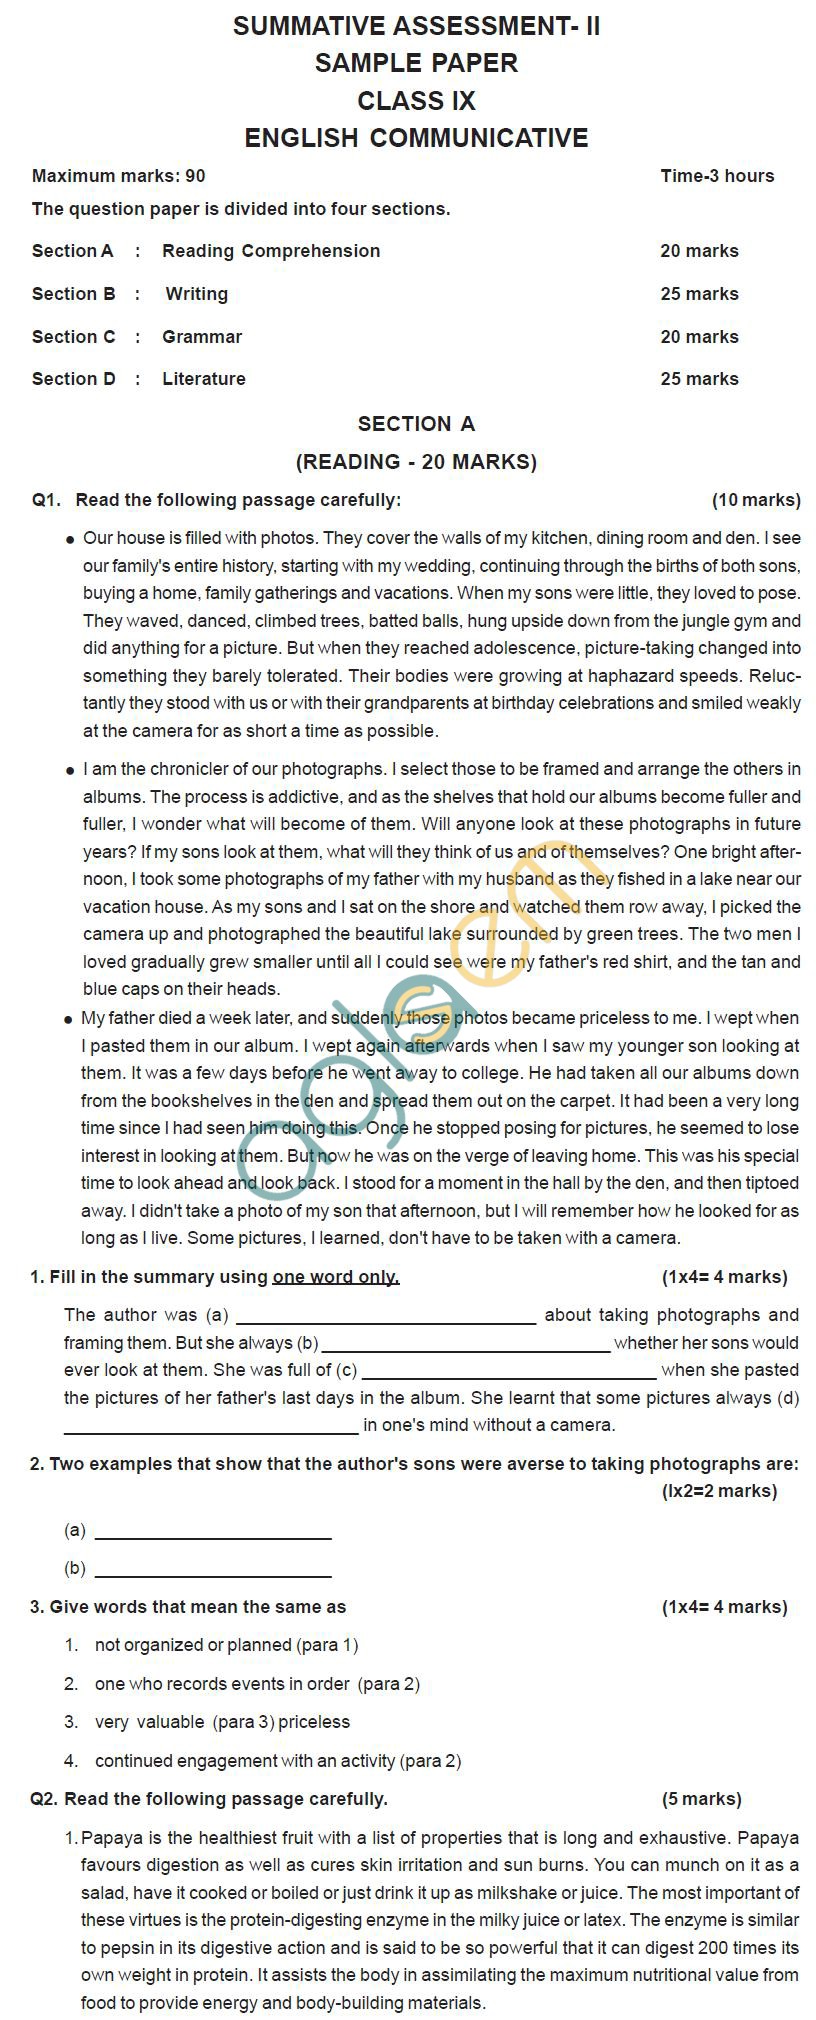 CBSE Sample Papers for Class 9 SA2 - English Communicative